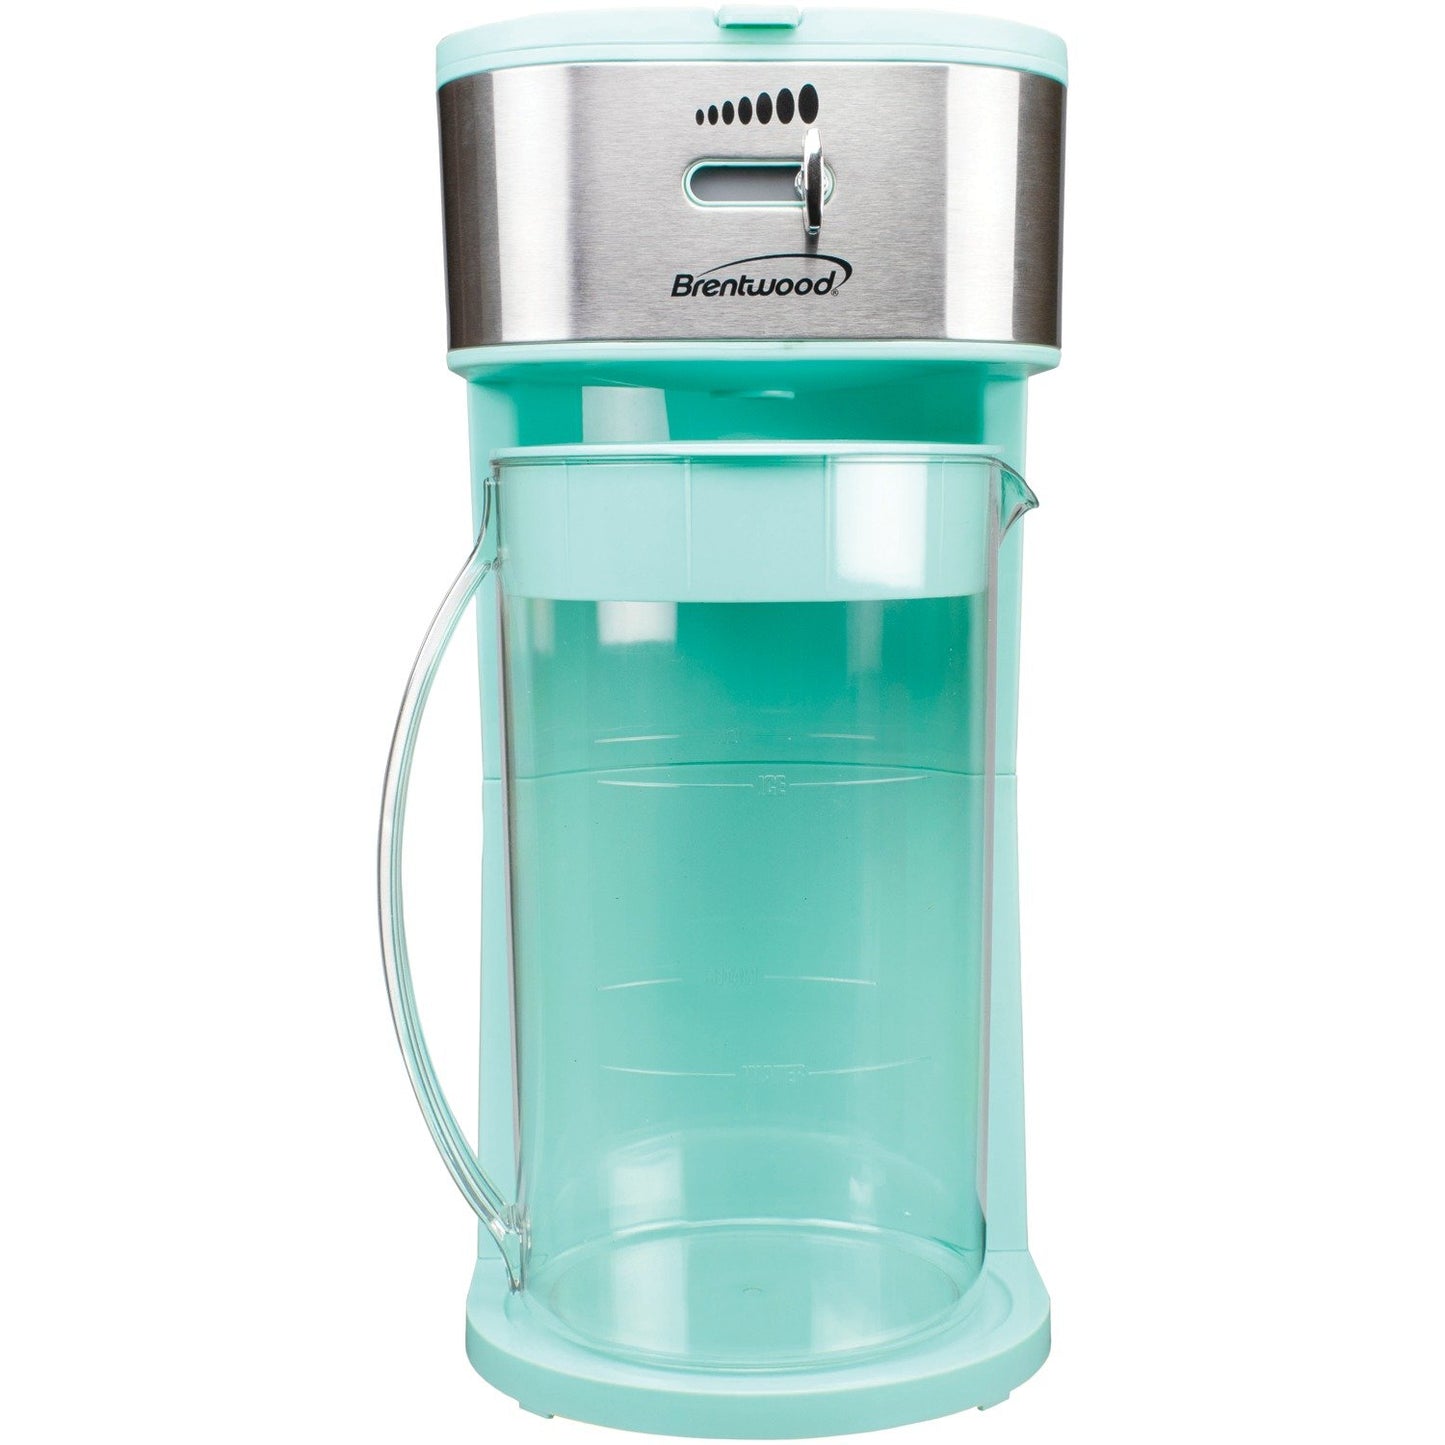 Brentwood Appl. KT-2150BL Iced Tea and Coffee Maker (Blue)